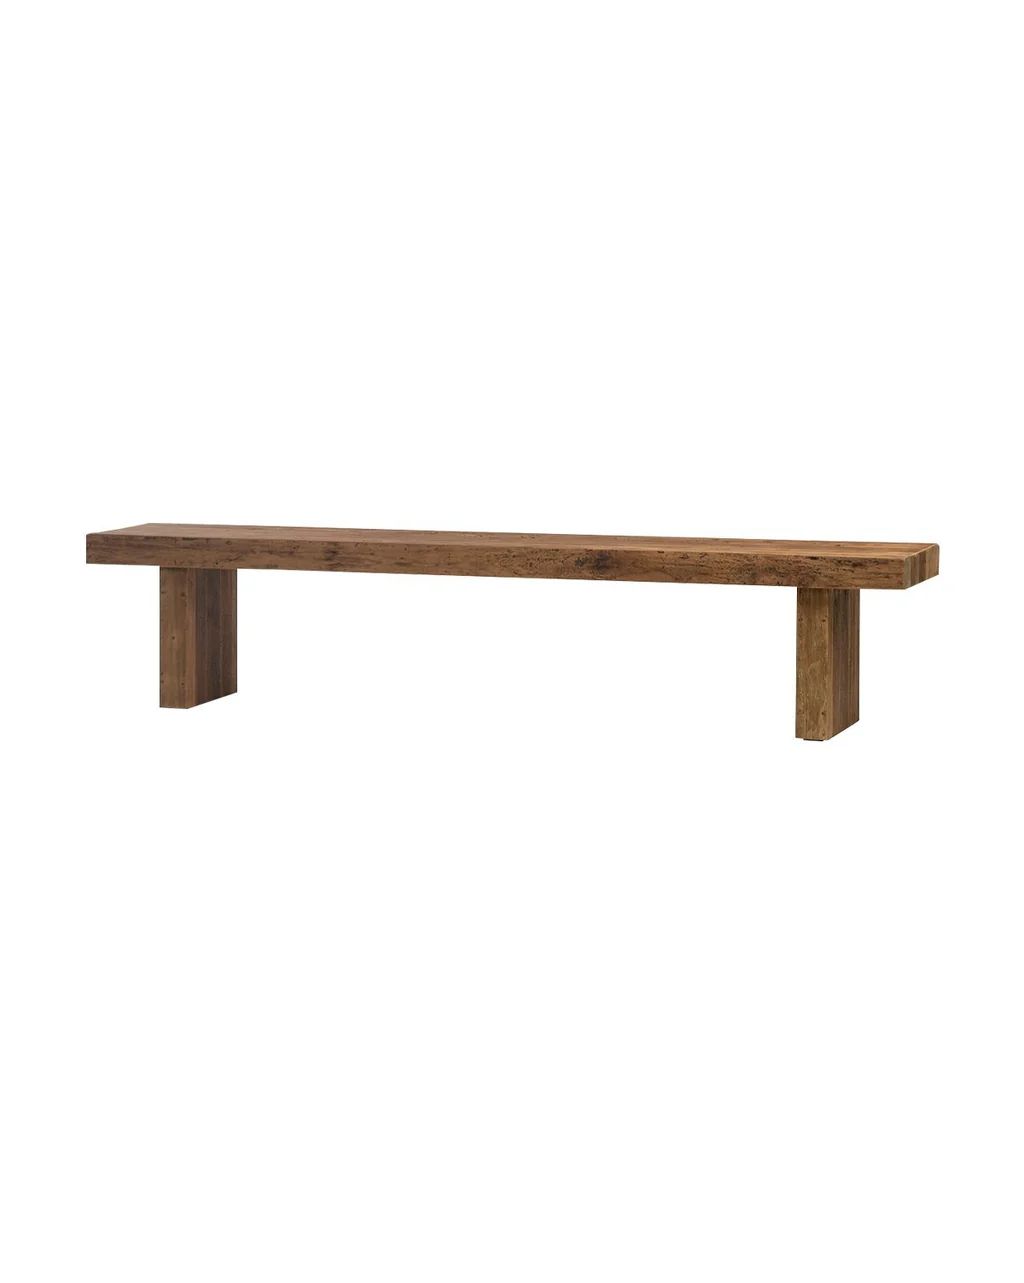 Eastwood Bench | McGee & Co.